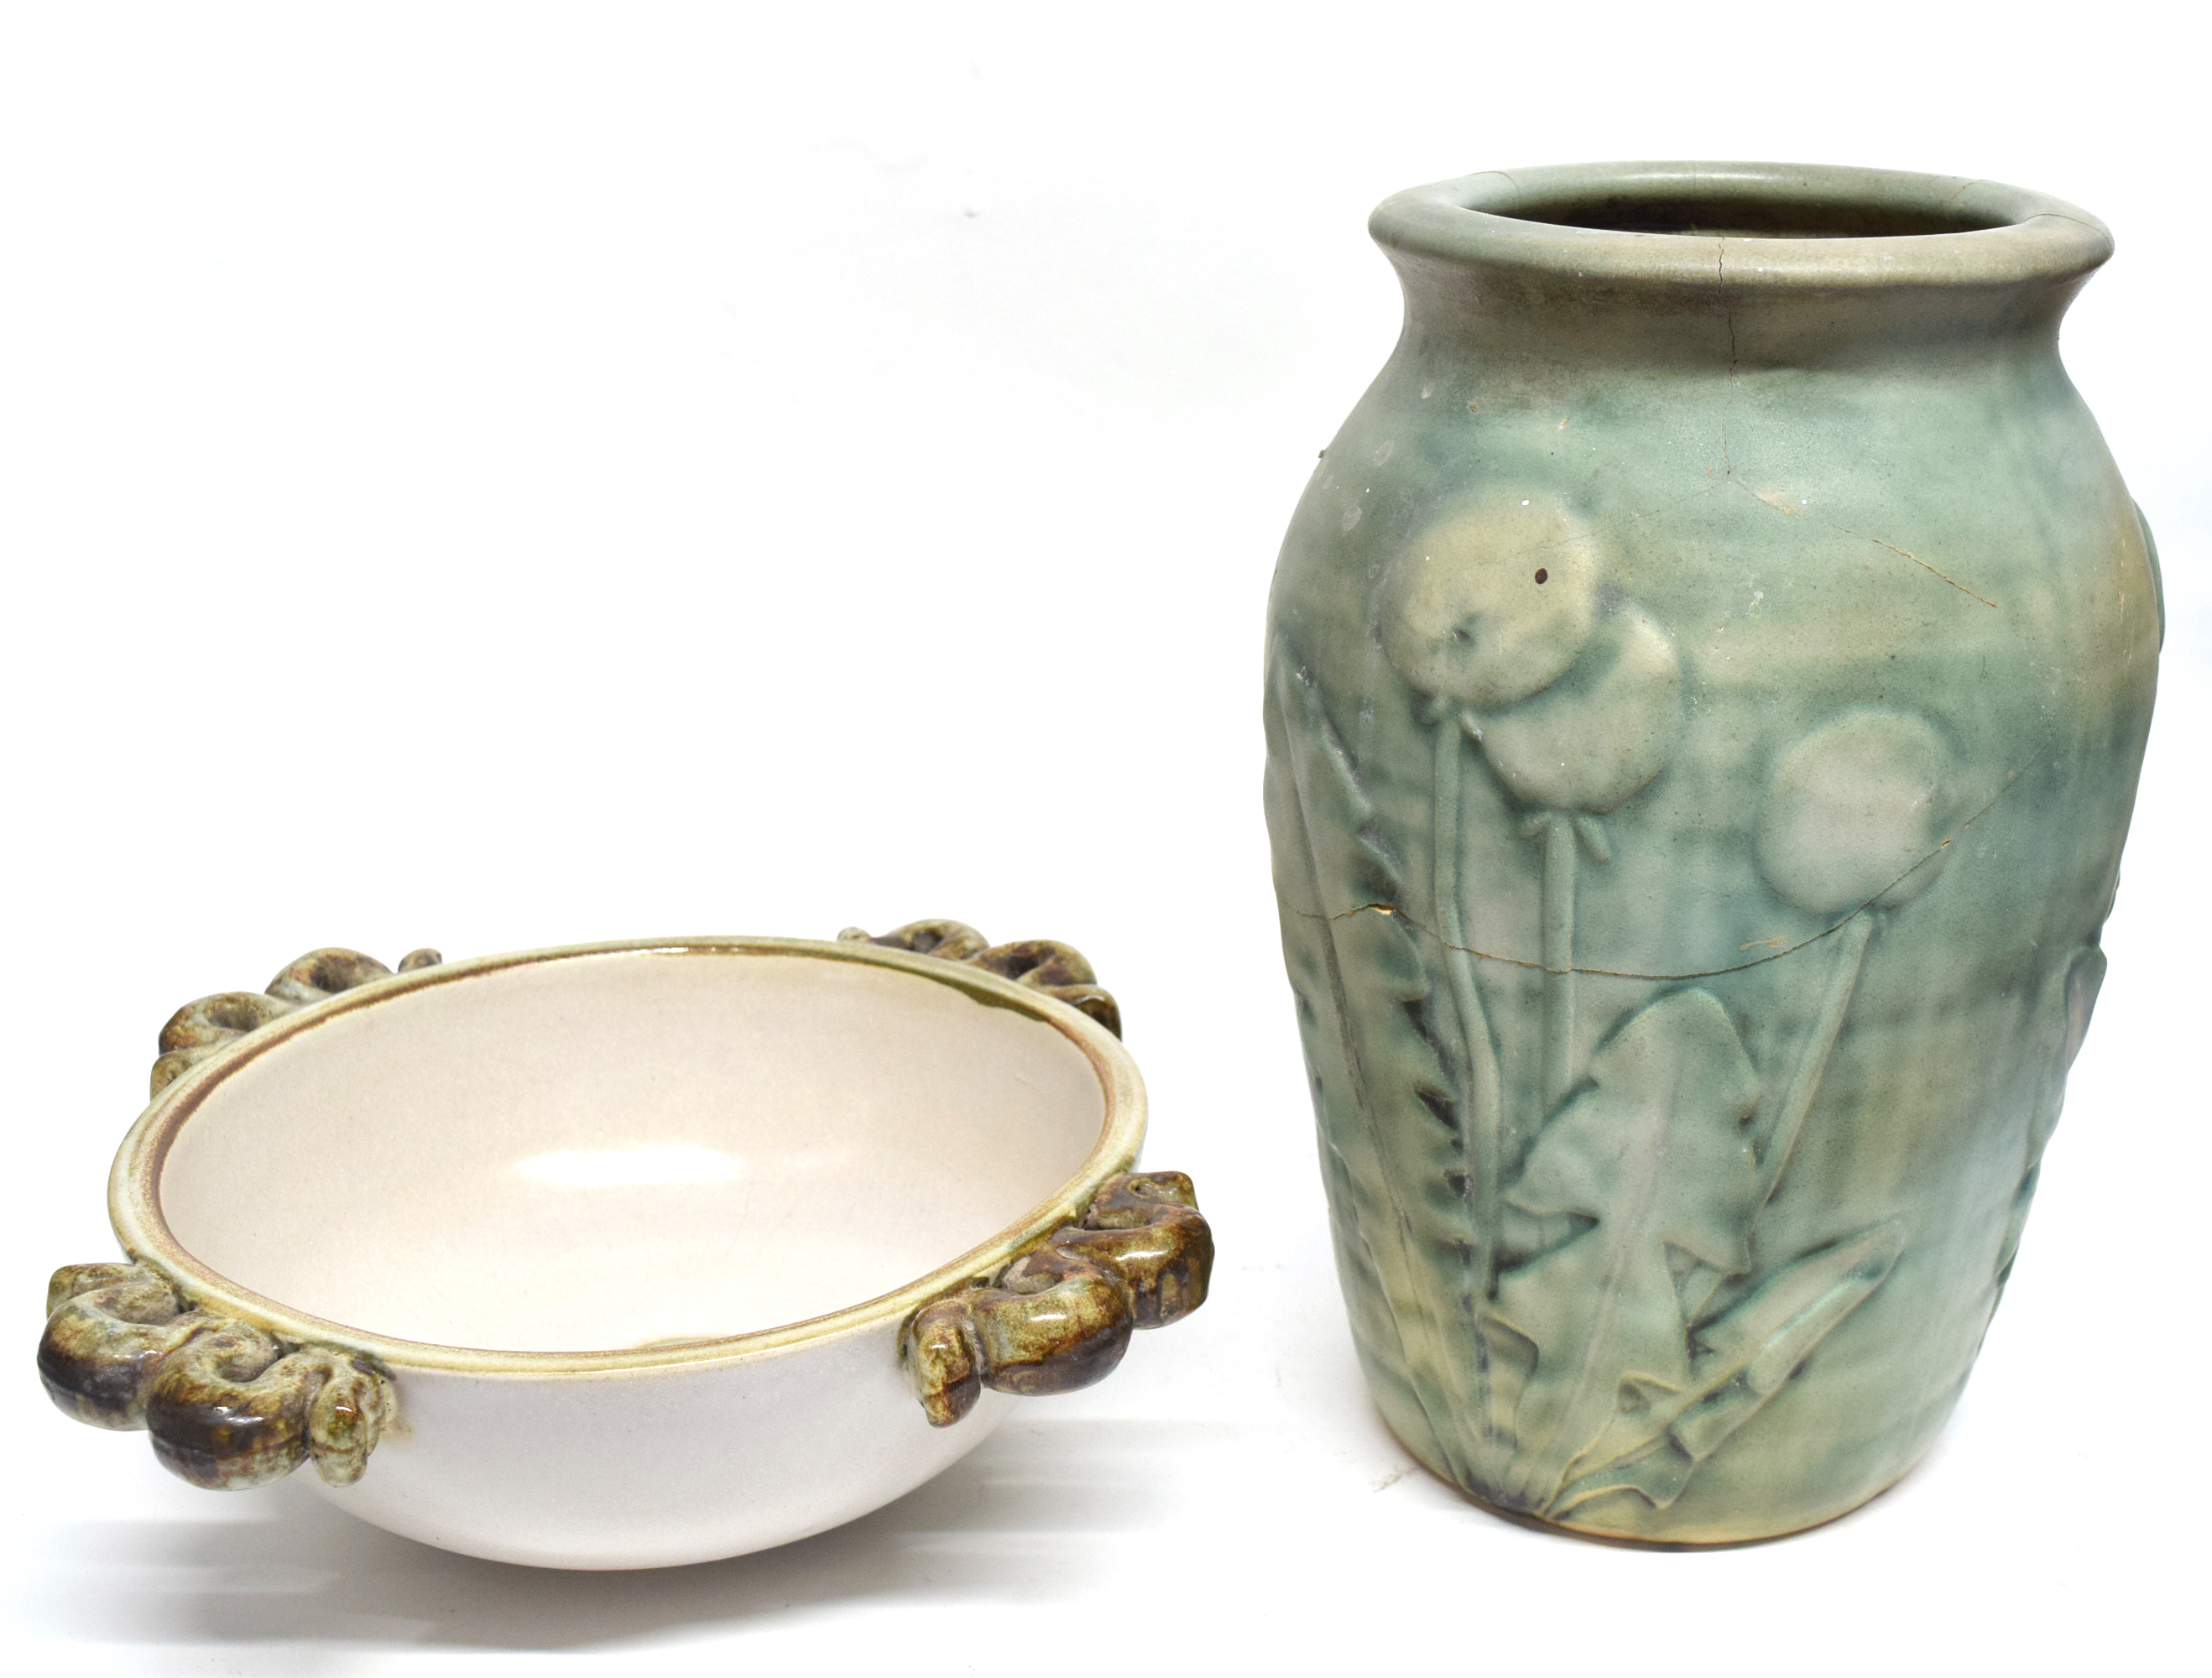 Two Art Deco pottery Denby wares mid-20th century including a bowl from Tyrolean range by Alice